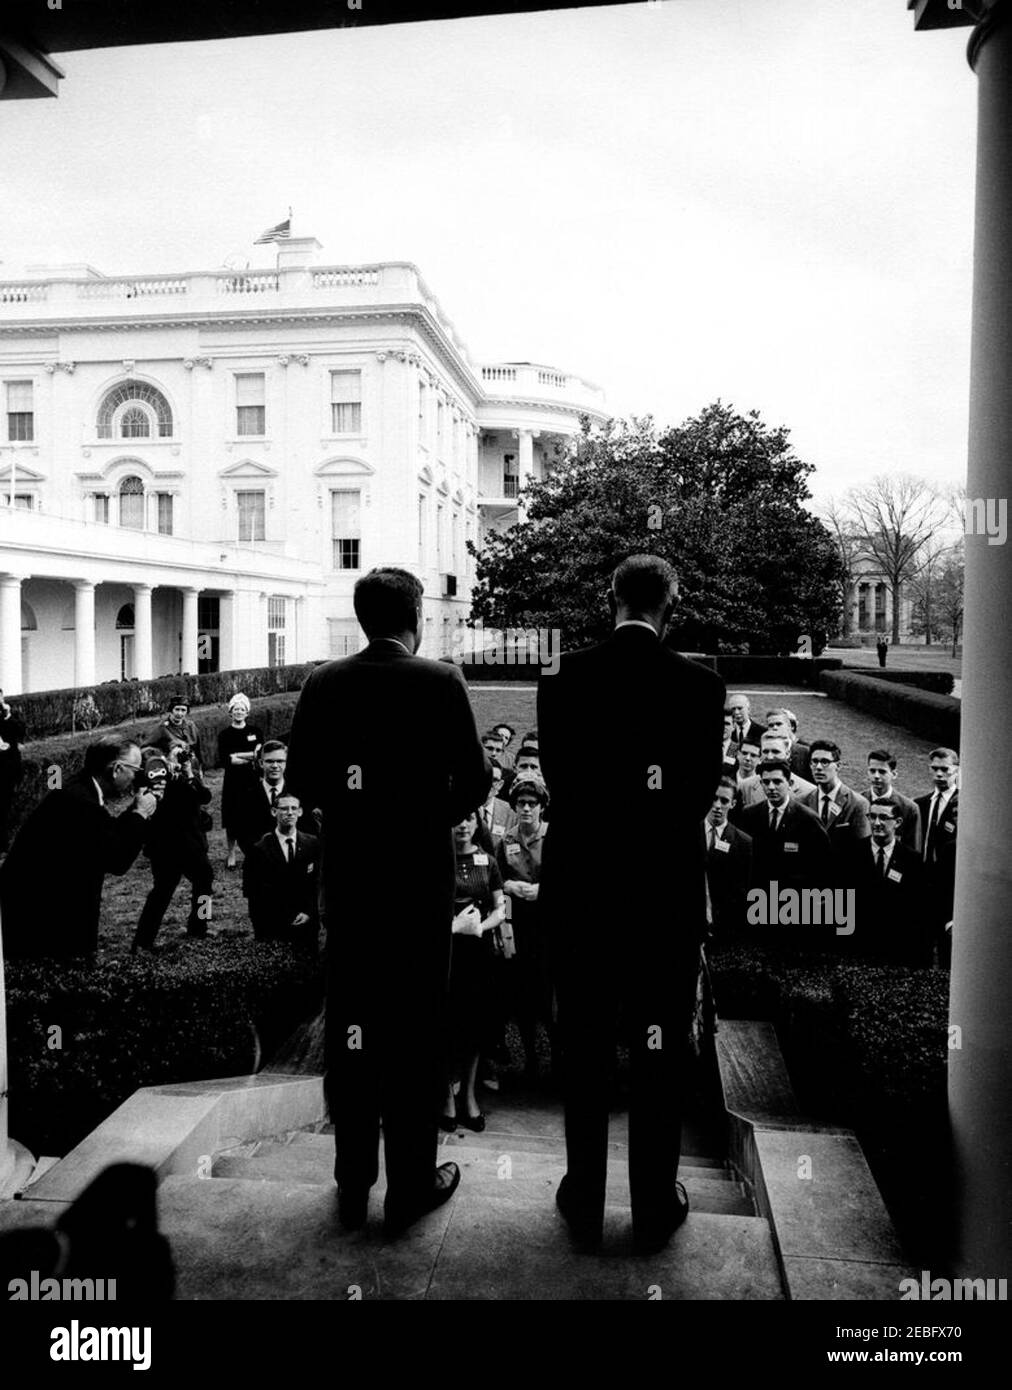 Visit of winners of the 20th Annual Science Talent Search, 12:05PM. Visit of the winners of the 20th Annual Westinghouse Science Talent Search (Science Service). President John F. Kennedy and Vice President Lyndon B. Johnson addressing visitors, with backs to camera. Left of President Kennedy: Donald Richard Hoffman (in front); unidentified boy; two unidentified women standing in back; two unidentified photographers standing at left. Between Kennedy and Johnson (front to back): Ann Mayer; Mary Sue Wilson; Michael Edward Lesk; others unidentified. Right of Johnson (L-R): James Michael Hosford; Stock Photo